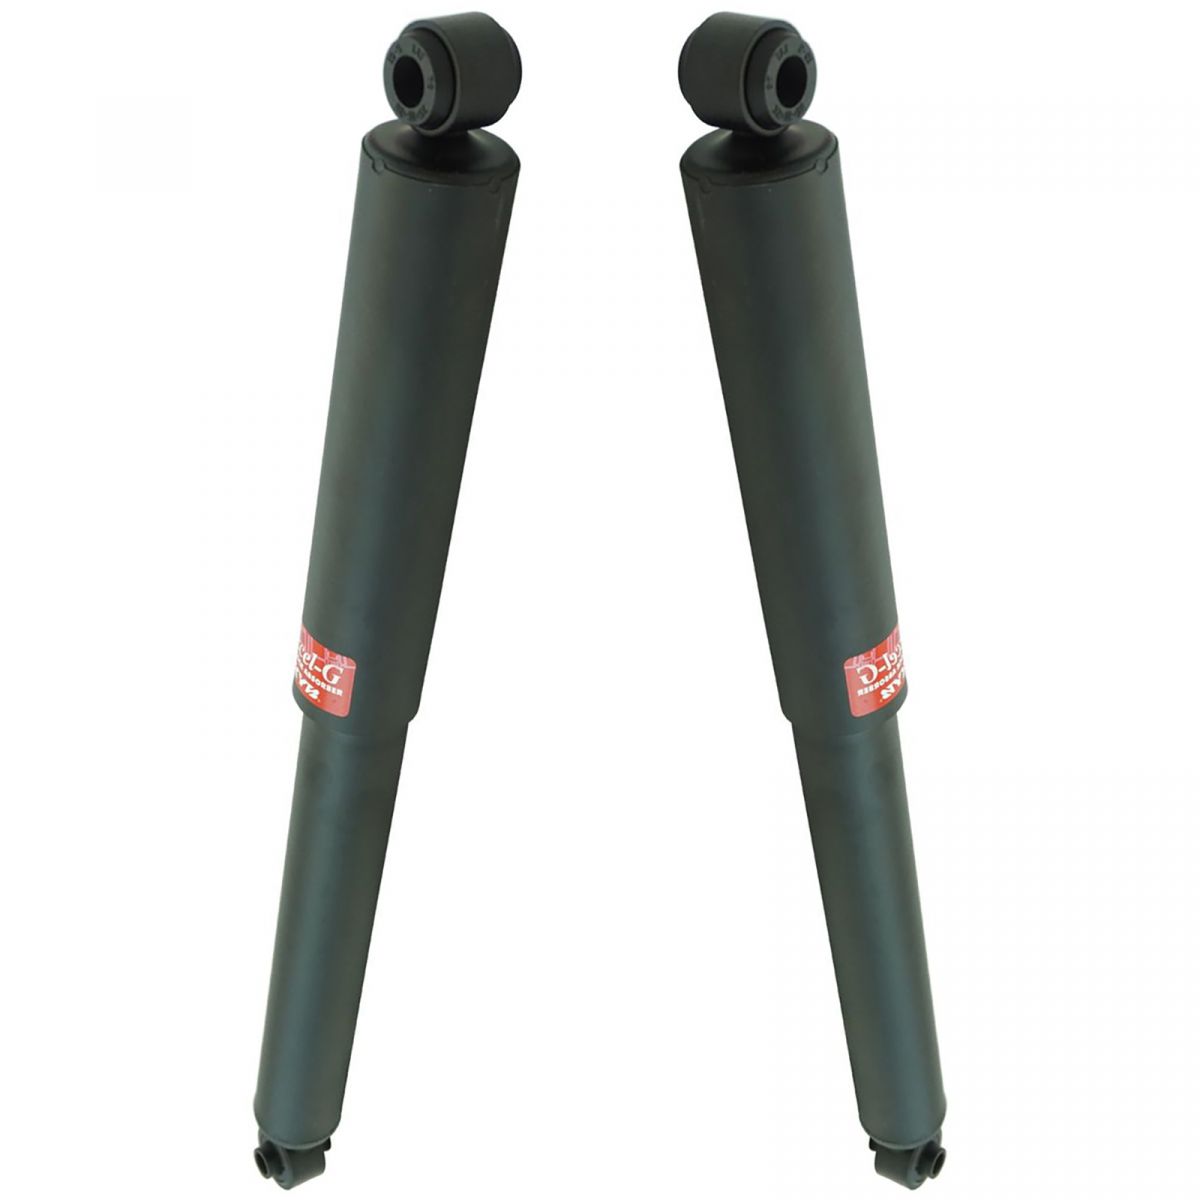 For Pair Set of 2 Rear Shock Absorbers KYB Excel-G 344396 for Ford Jeep Mazda